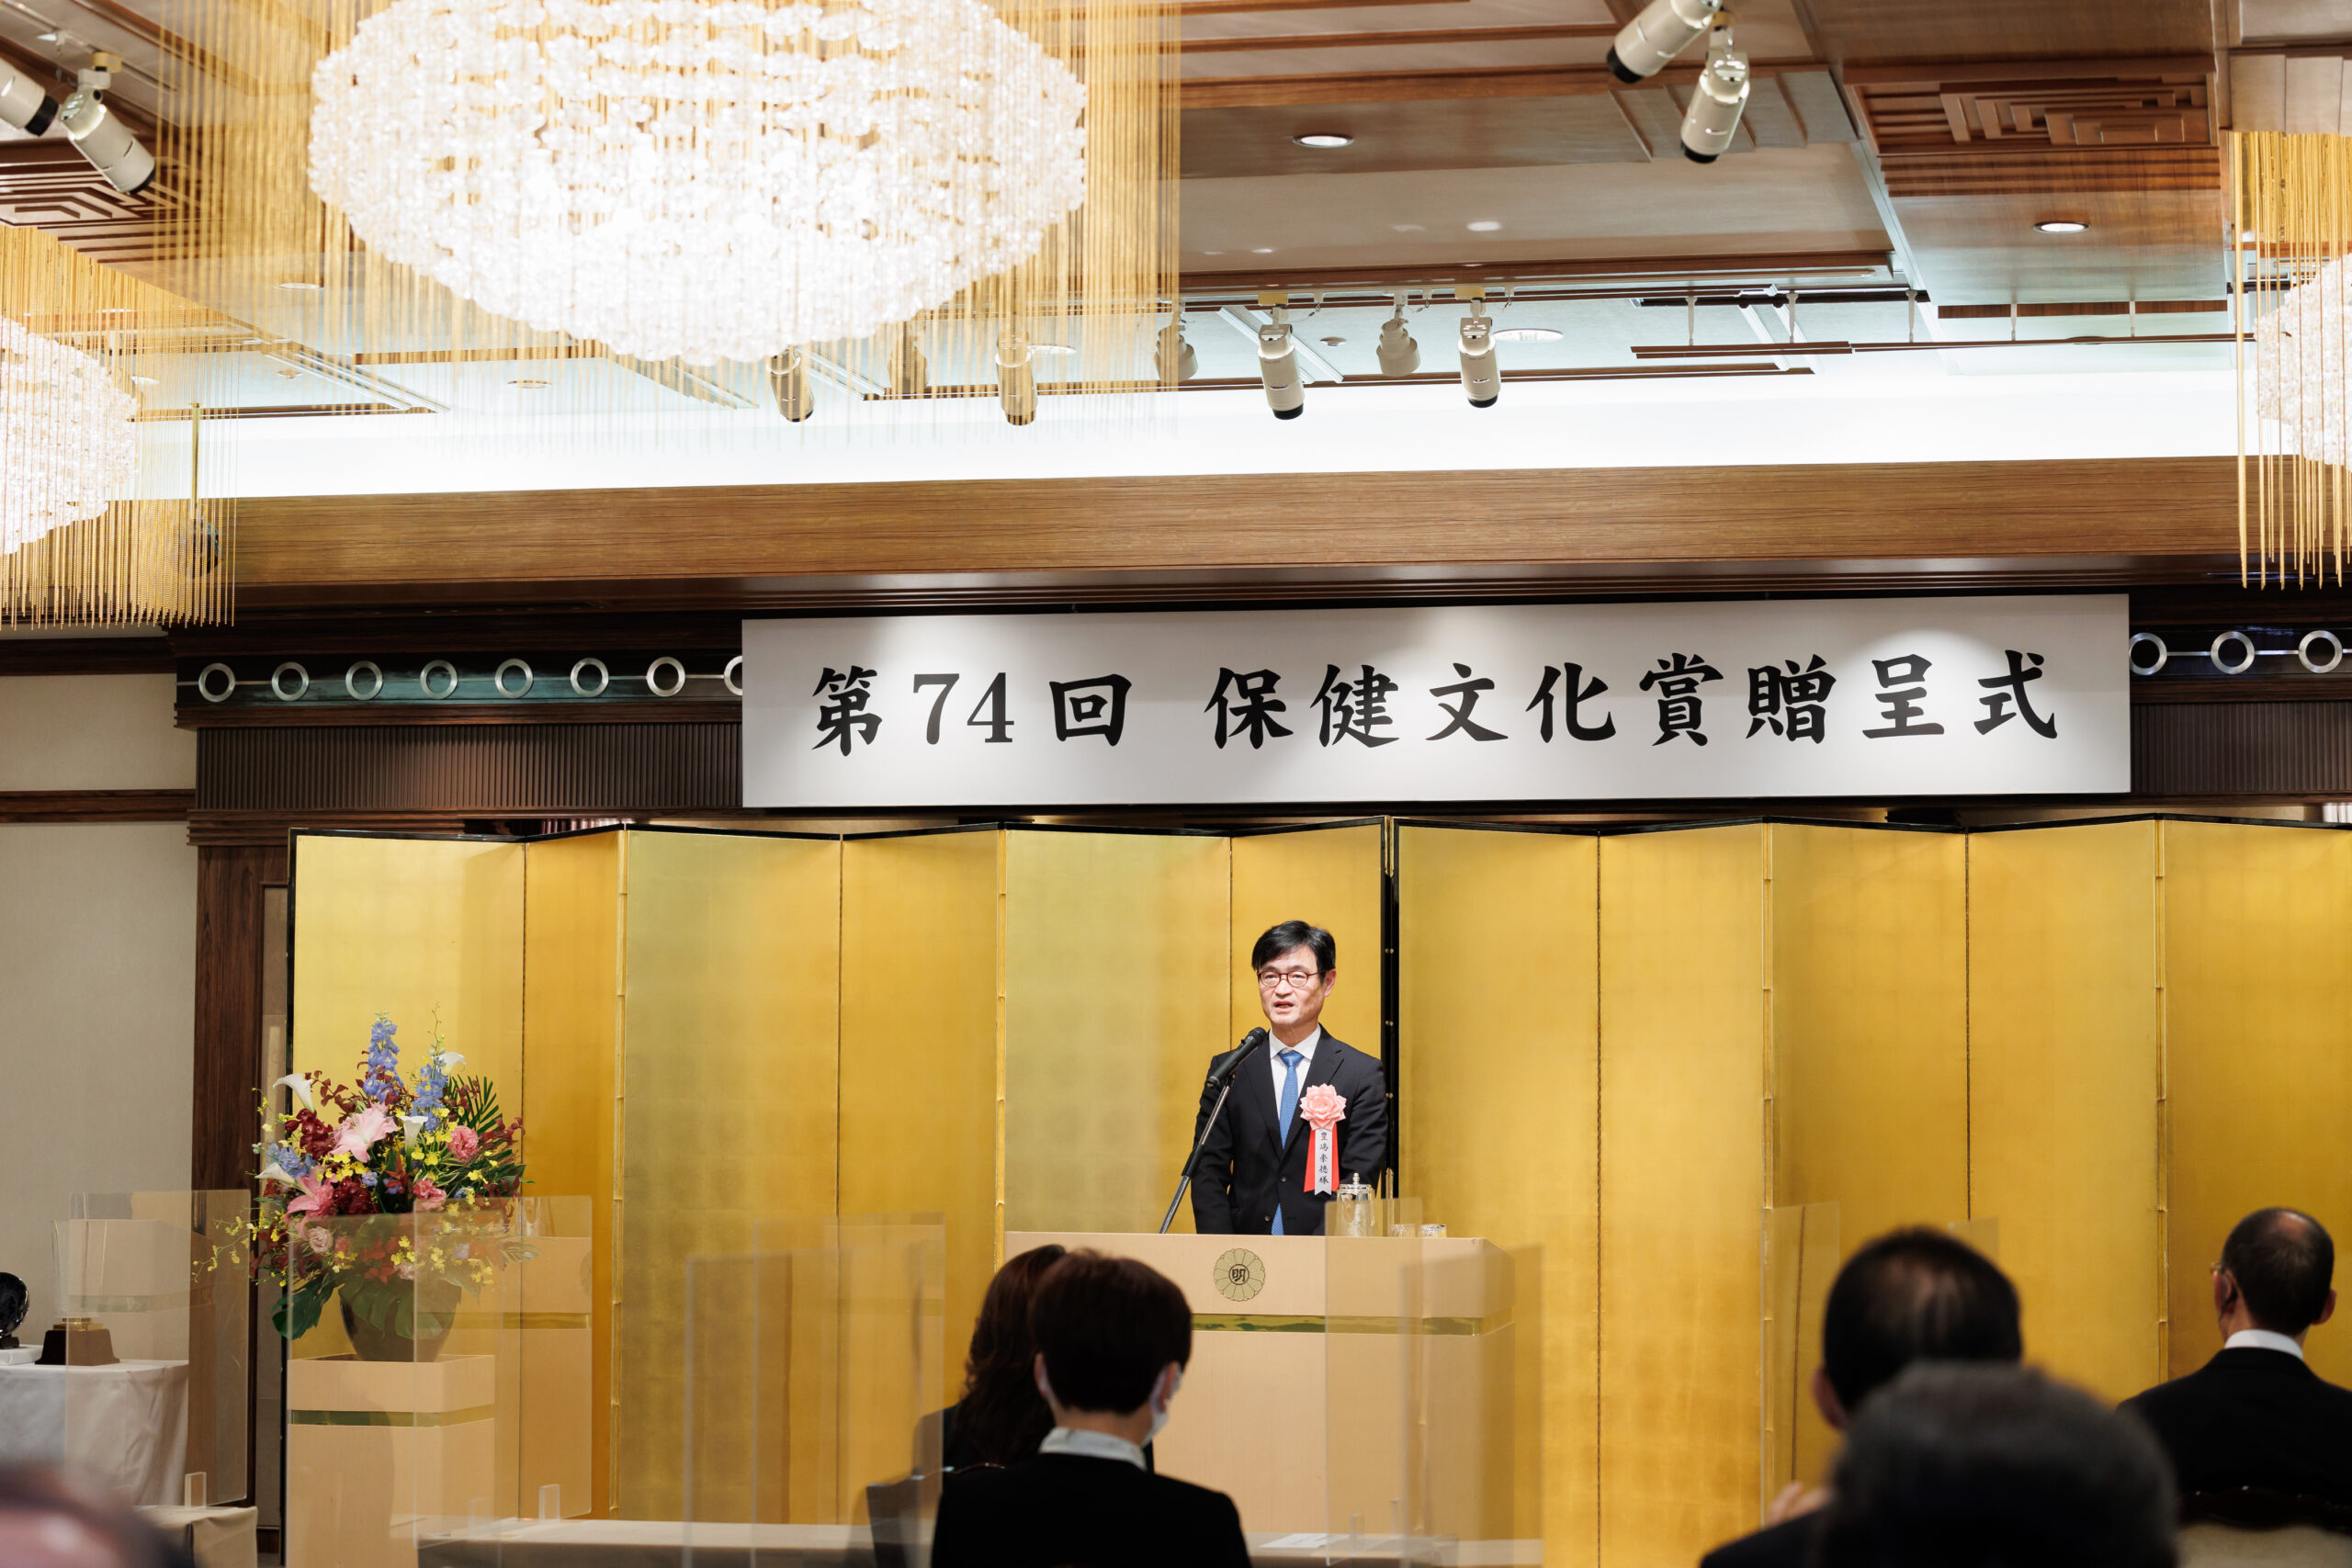 Professor Takanori Teshima addressing the audience at the 74th Health Culture Award Ceremony.